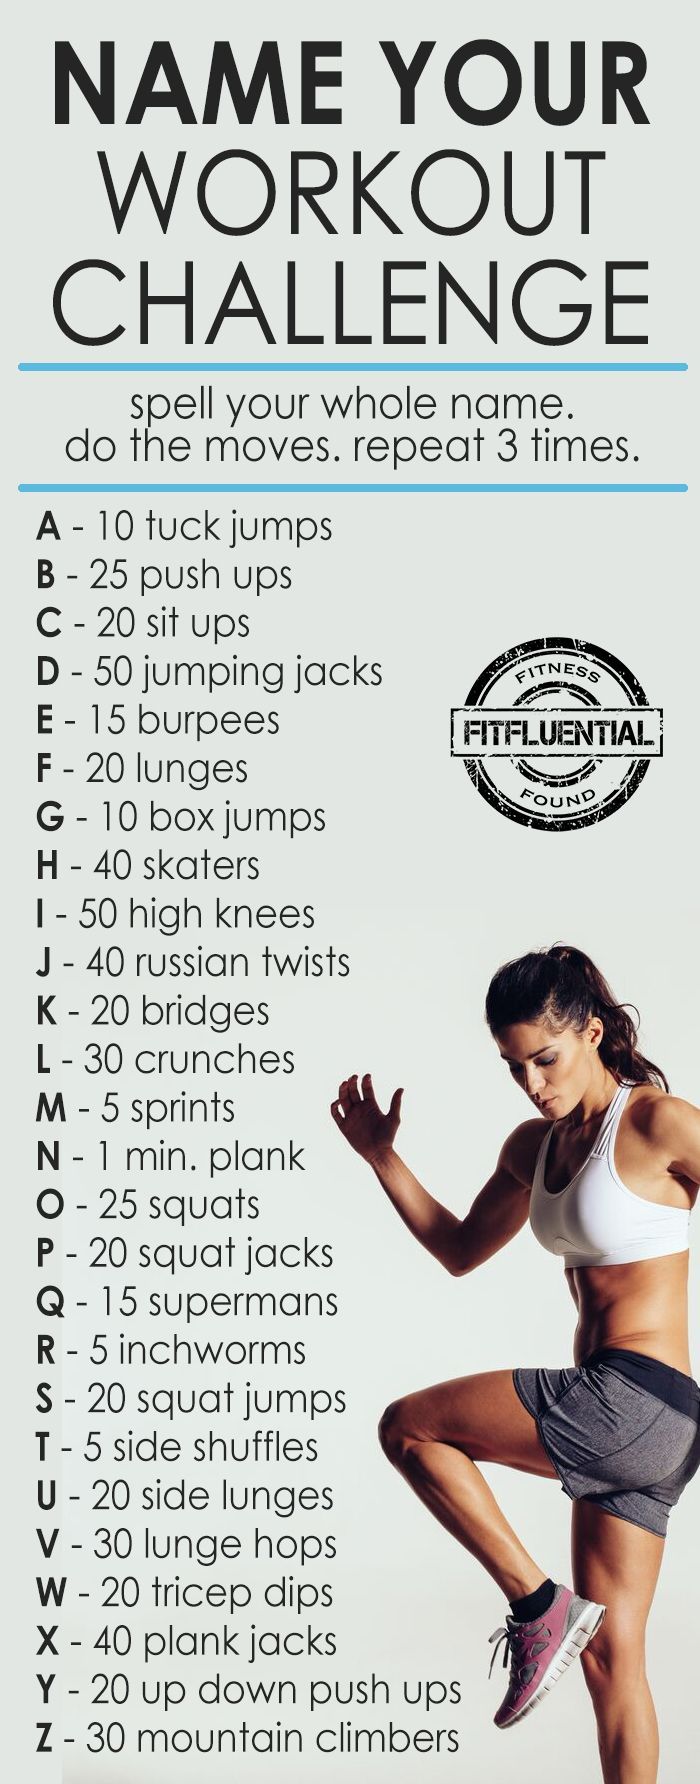 “Name” Your workout challenge from FitFluential #2_week_fun